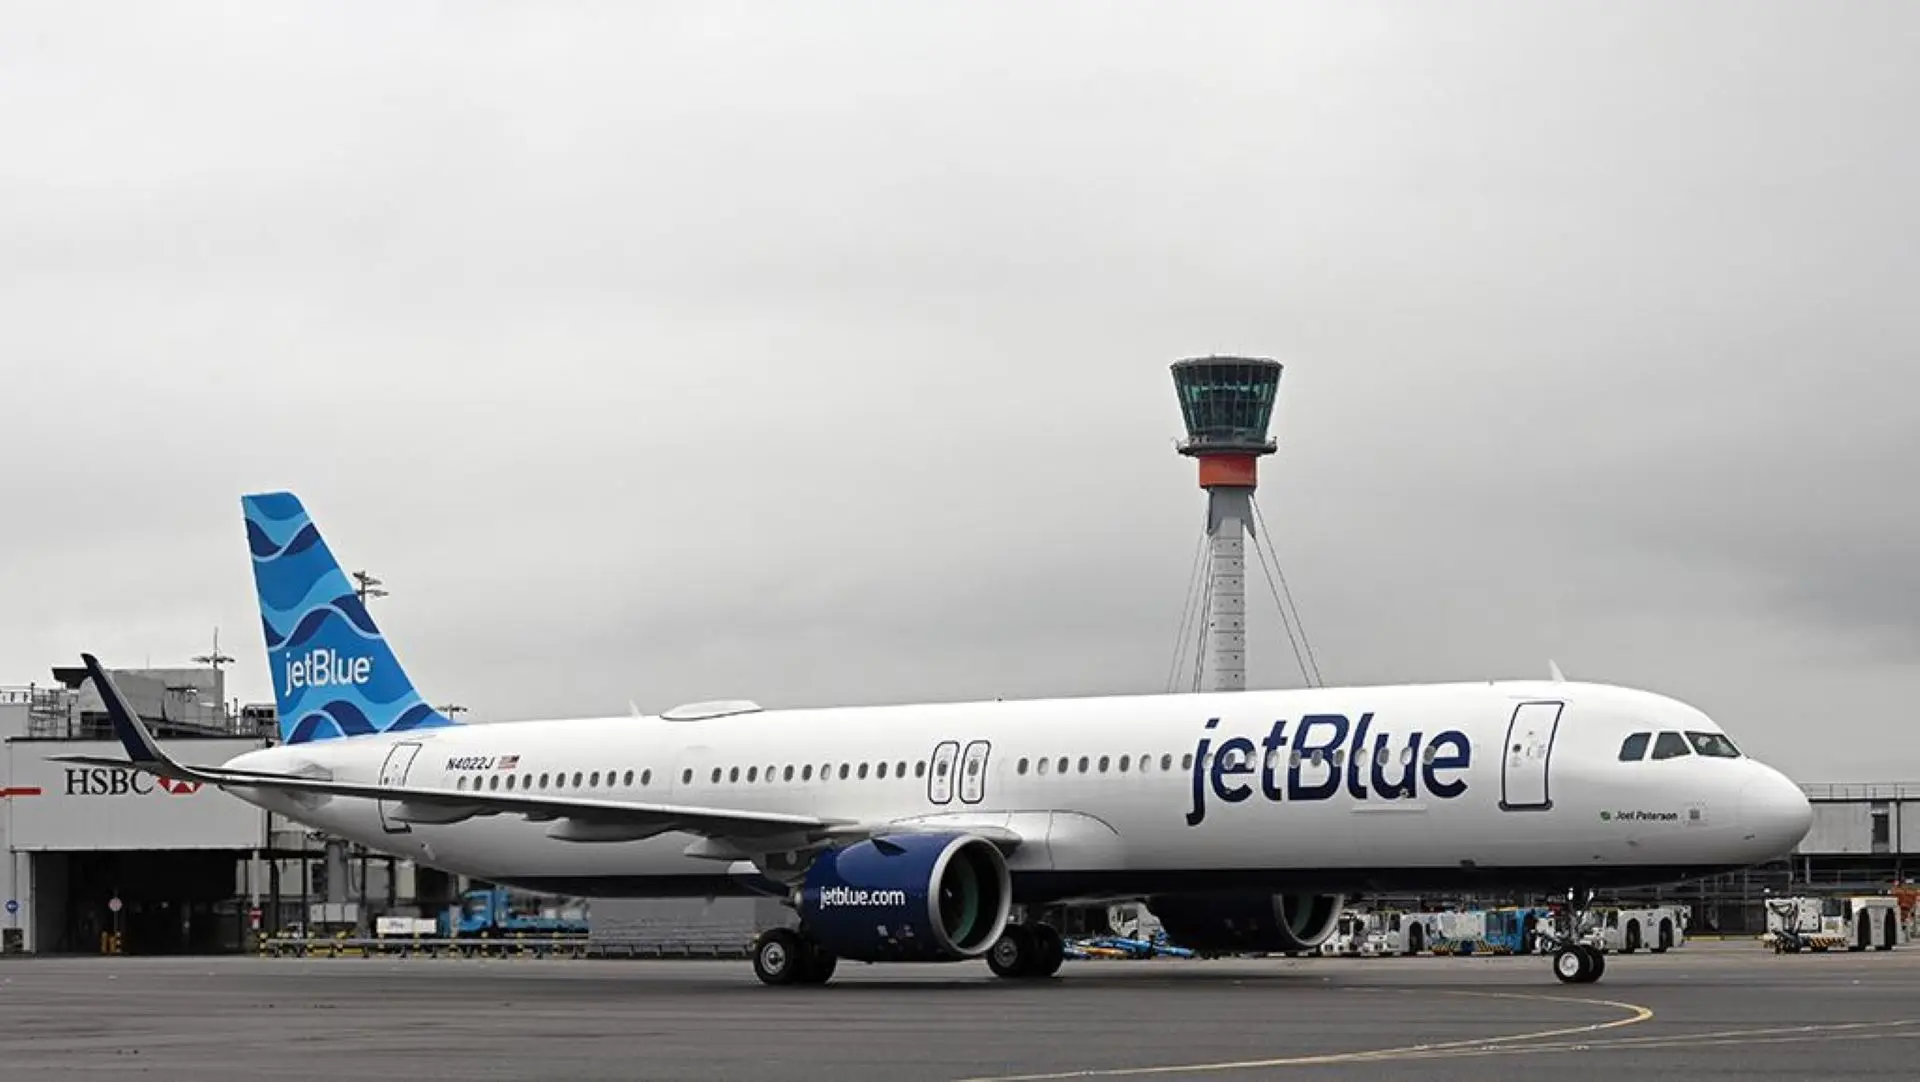 Airlines News - JetBlue launches New York/London daytime flights